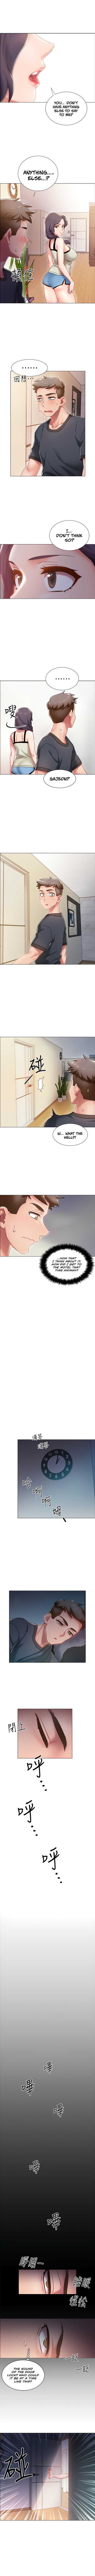 Enlistment Countdown - Chapter 2 Page 7